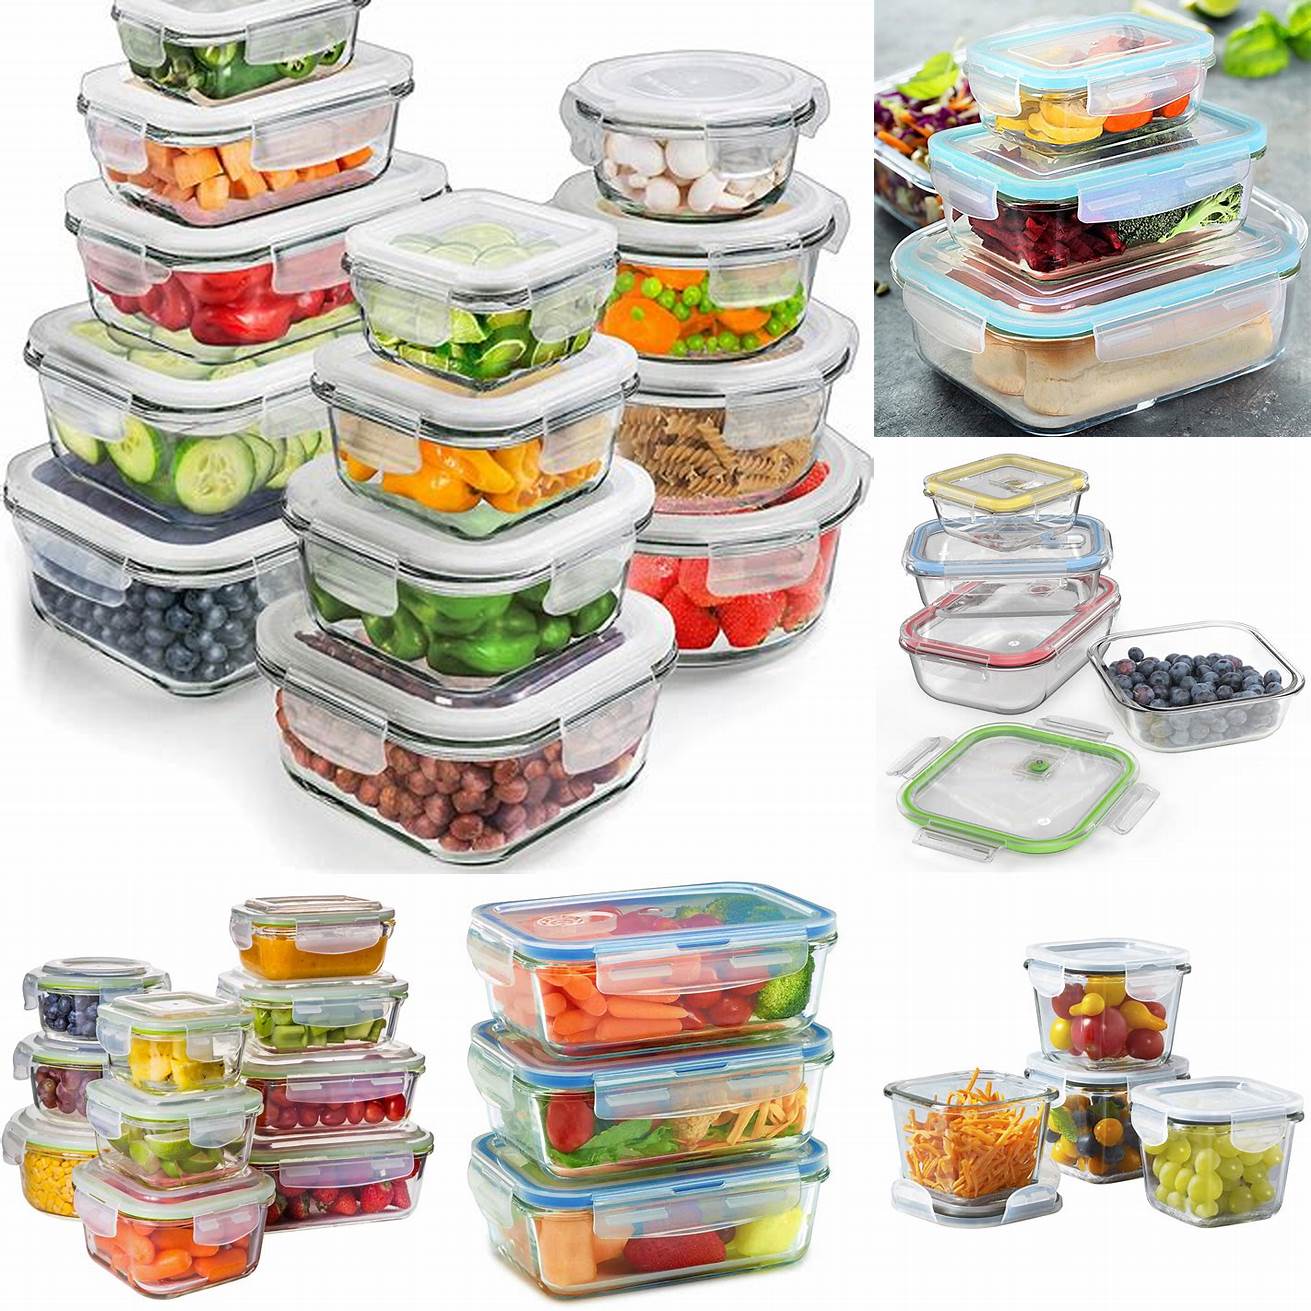 Reusable glass containers for food